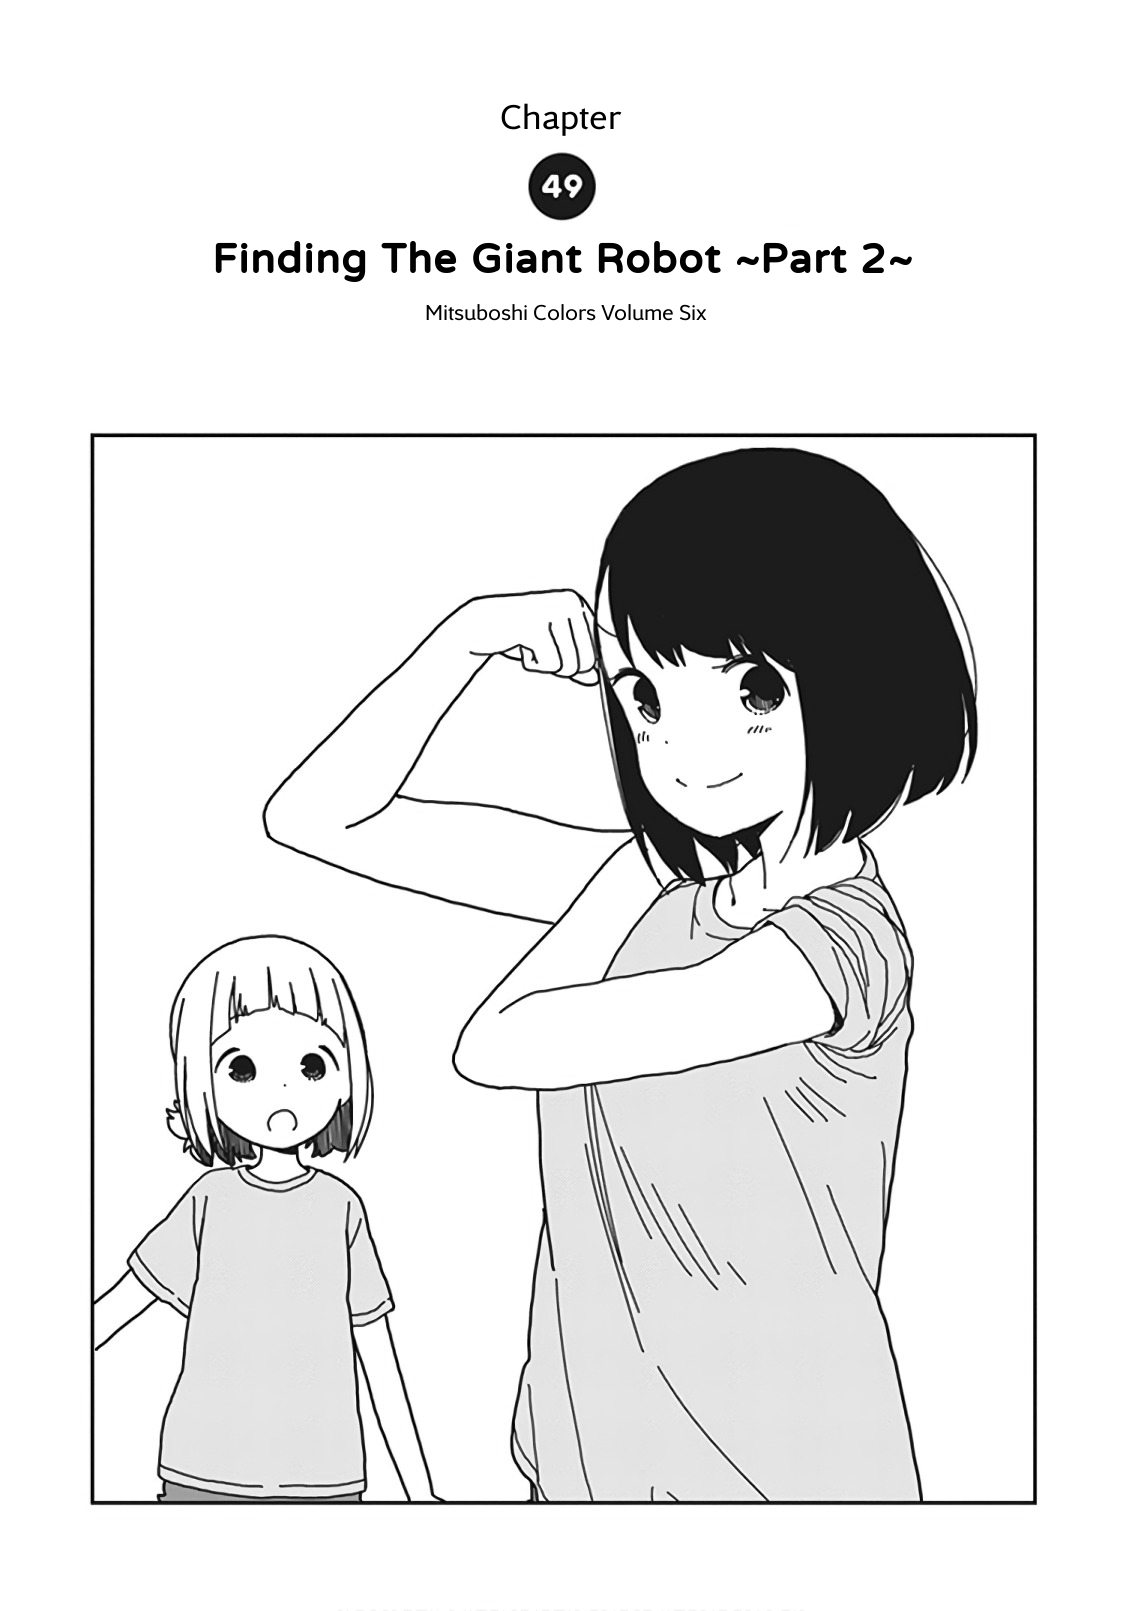 Mitsuboshi Colors Vol. 6 Ch. 49 Finding The Giant Robot ~Part 2~